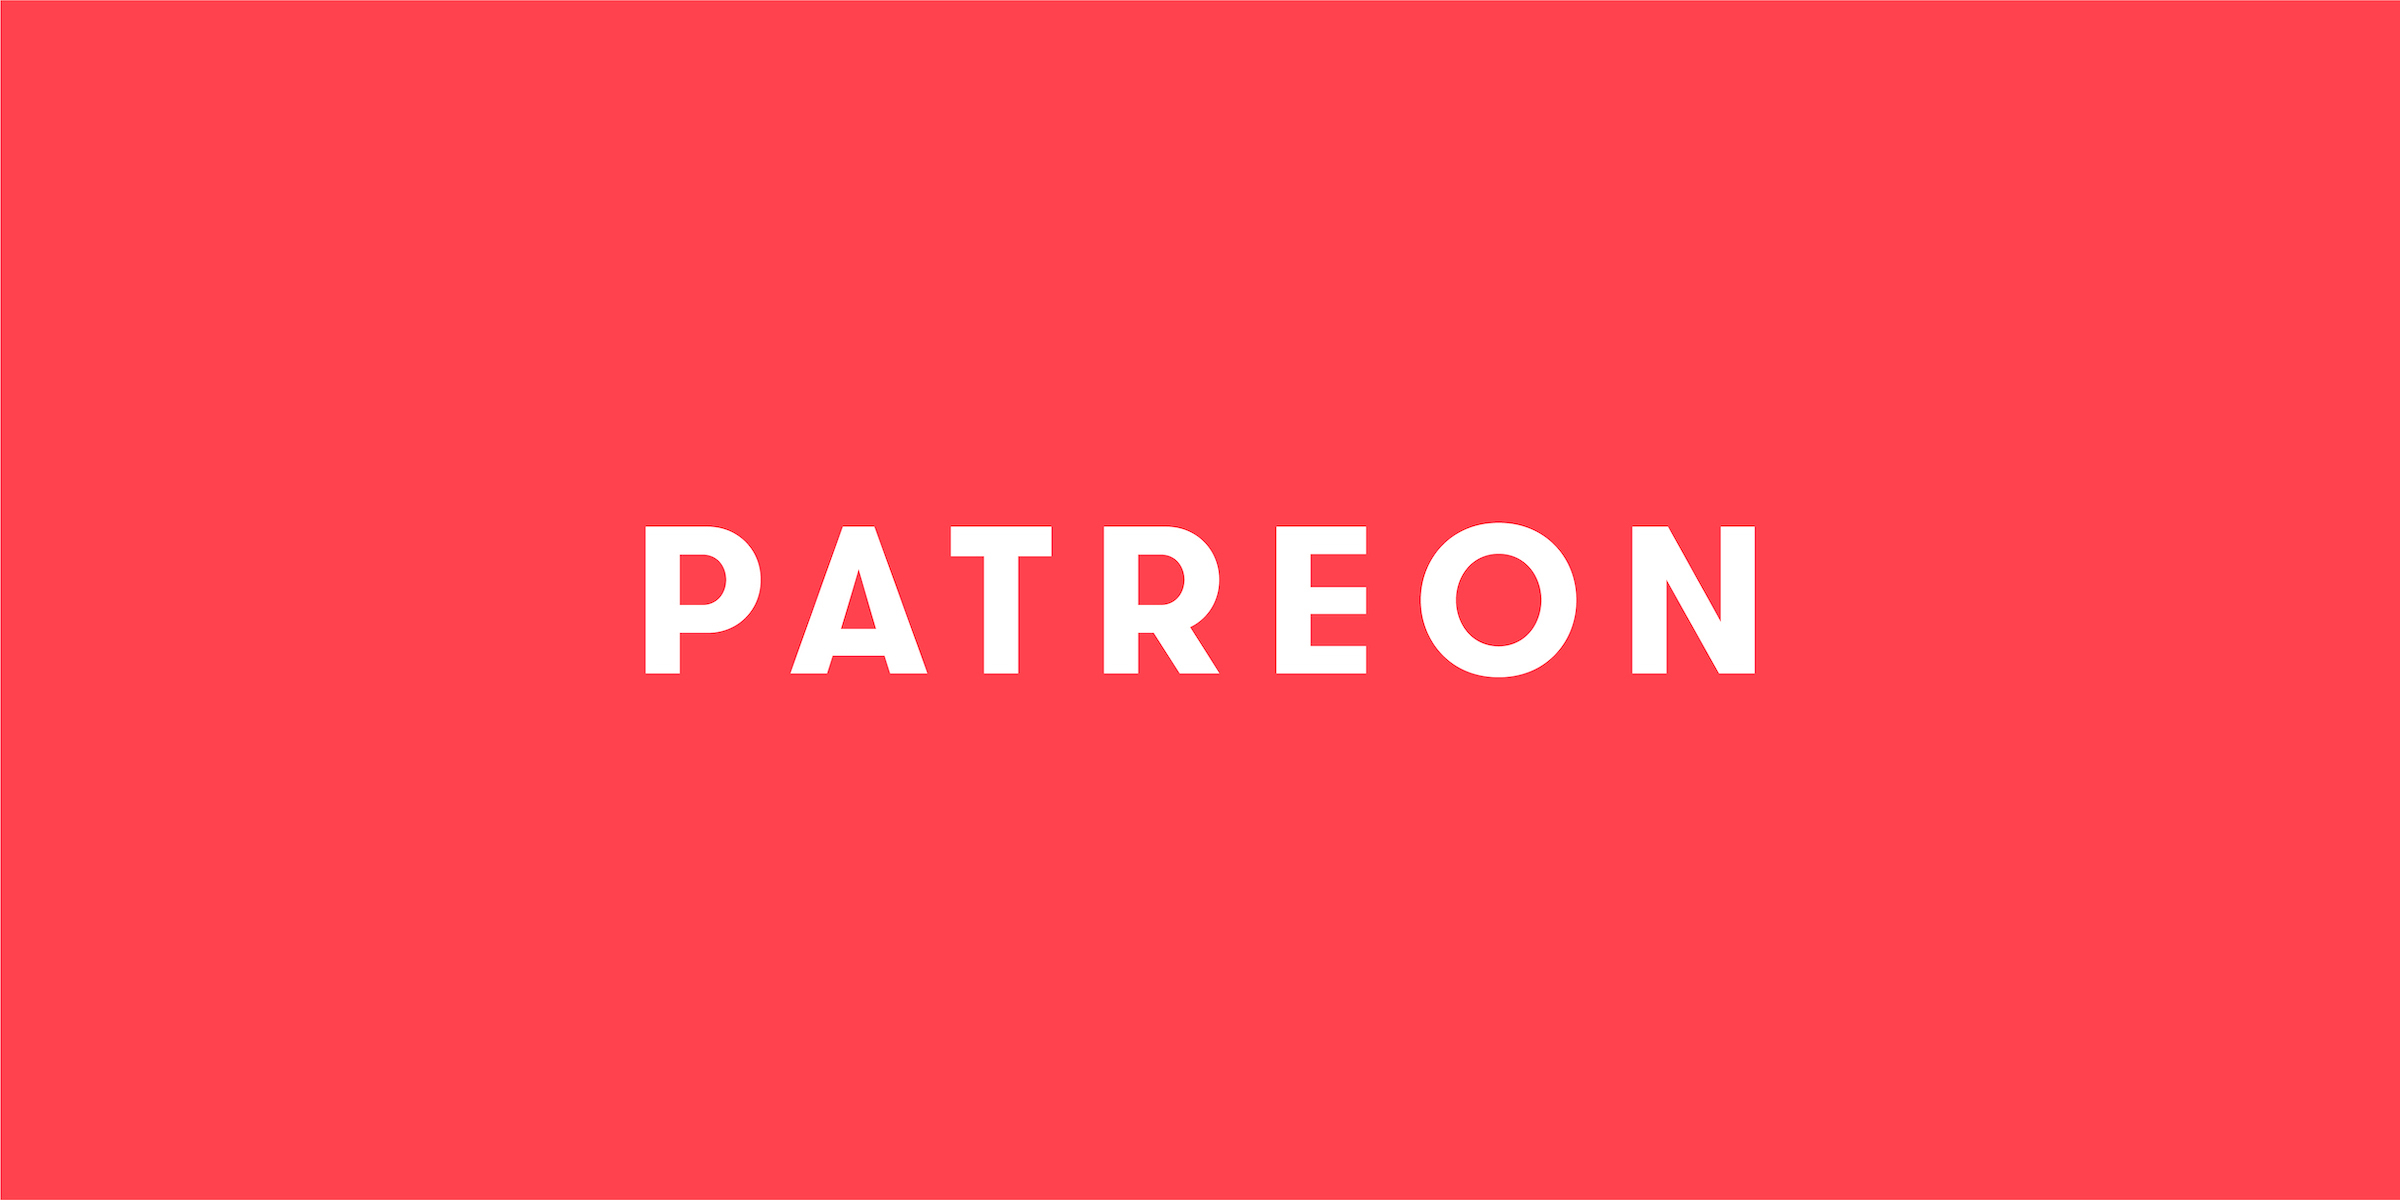 Patreon logo with white bold font and coral background